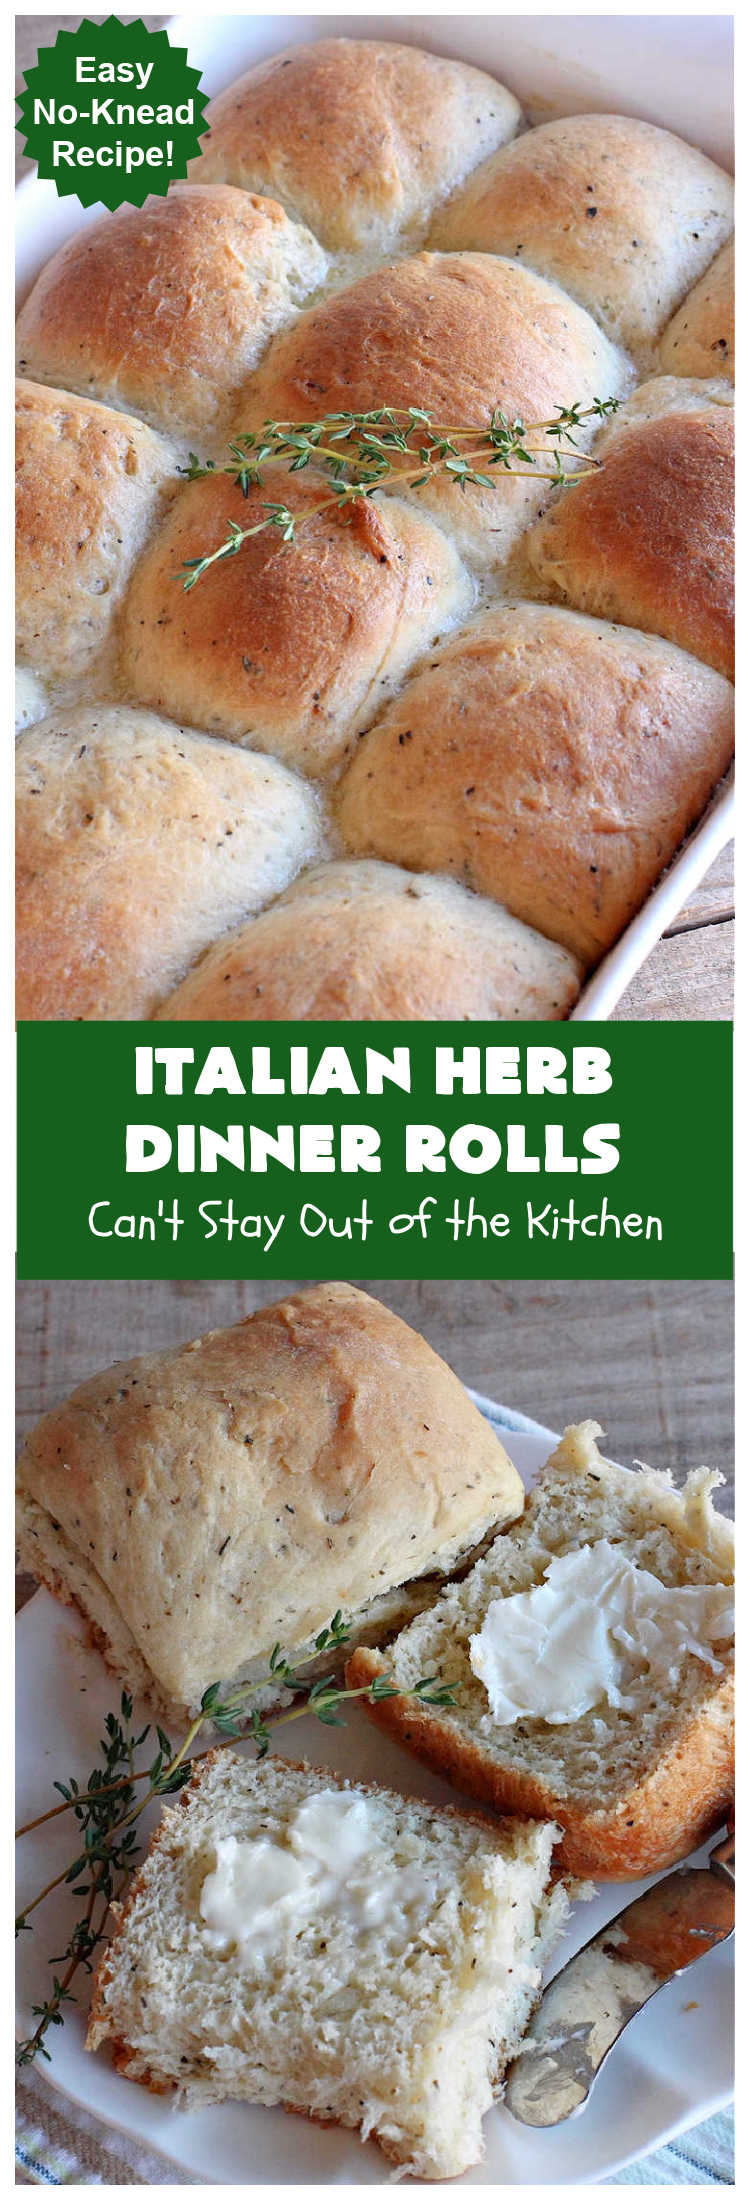 Italian Herb Dinner Rolls | Can't Stay Out of the Kitchen